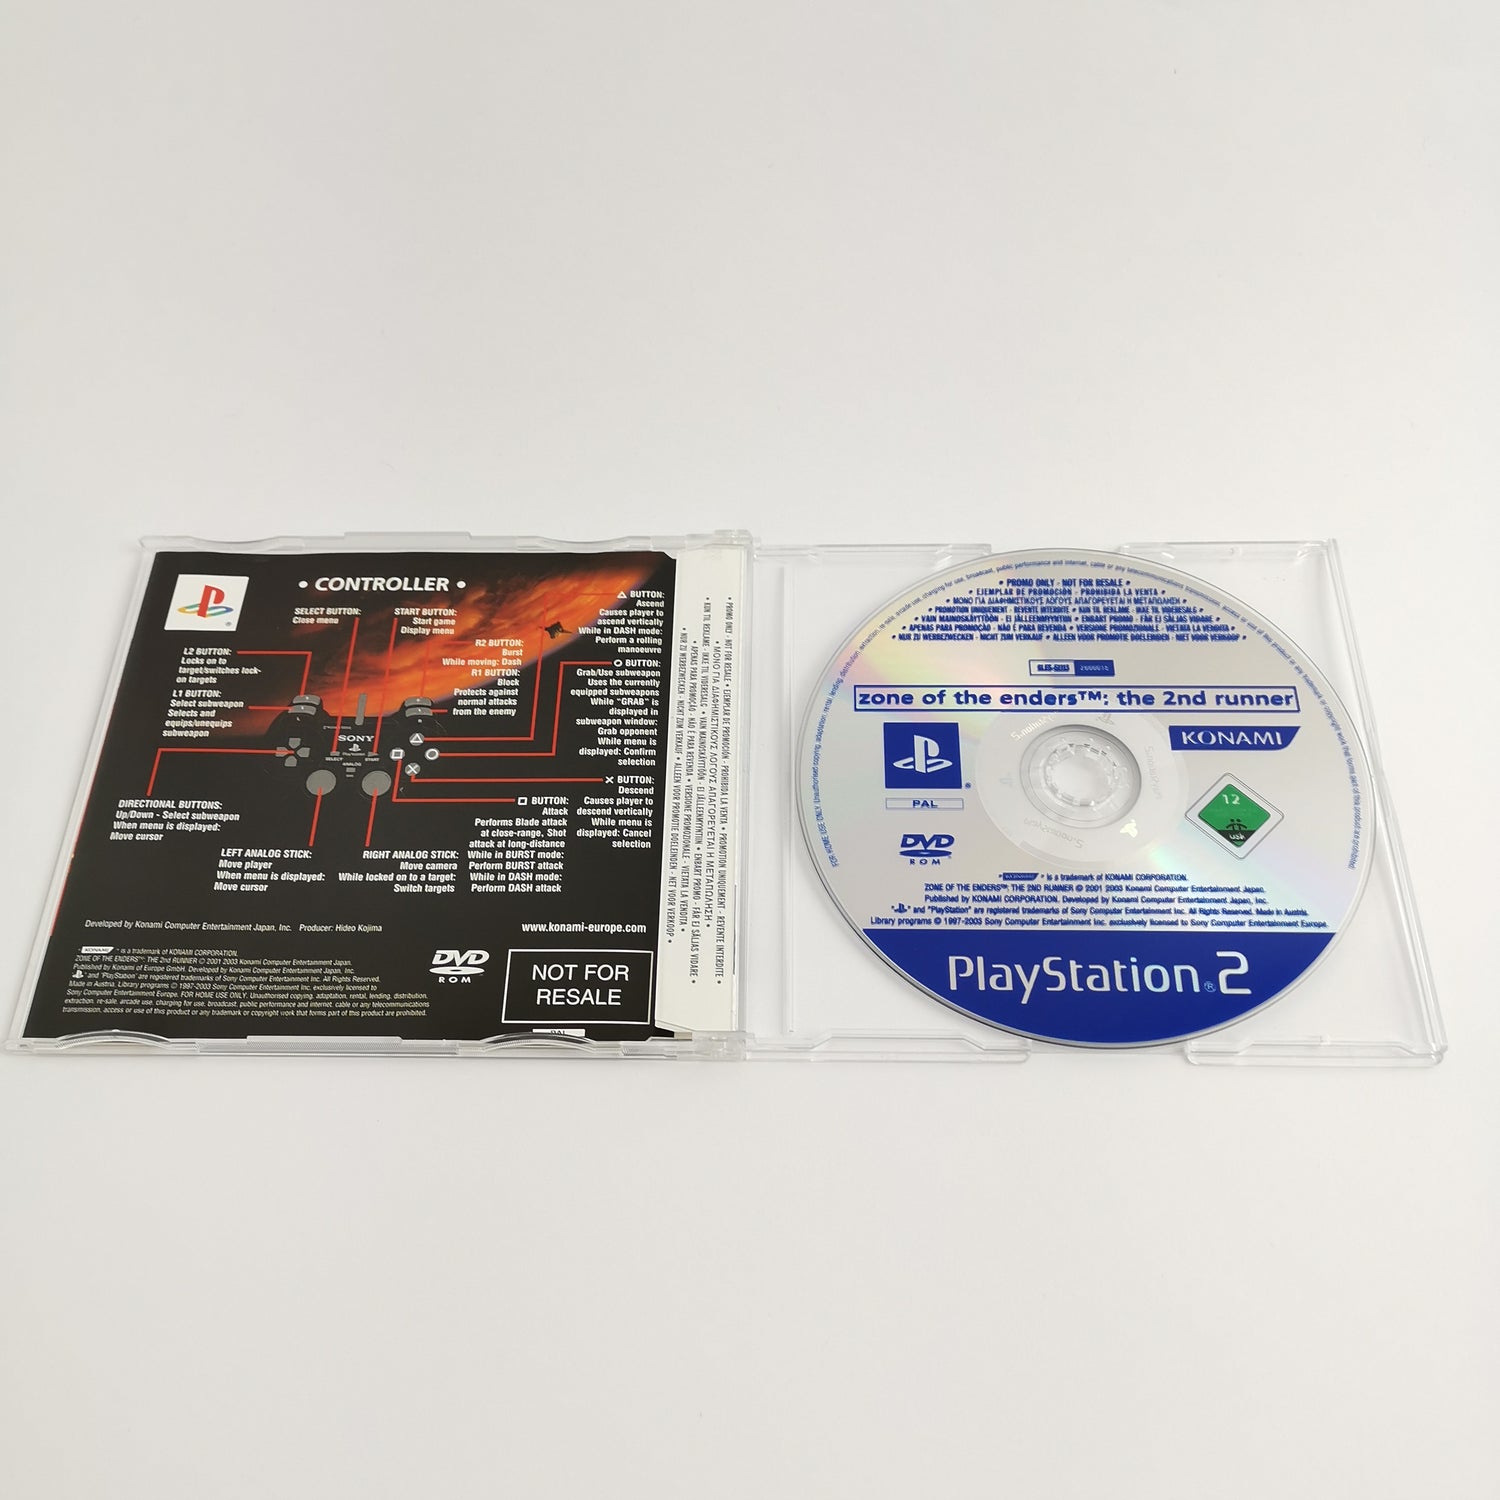 Sony Playstation 2 Promo Game: Zone of the Enders The 2nd Runner - PS2 OVP PAL